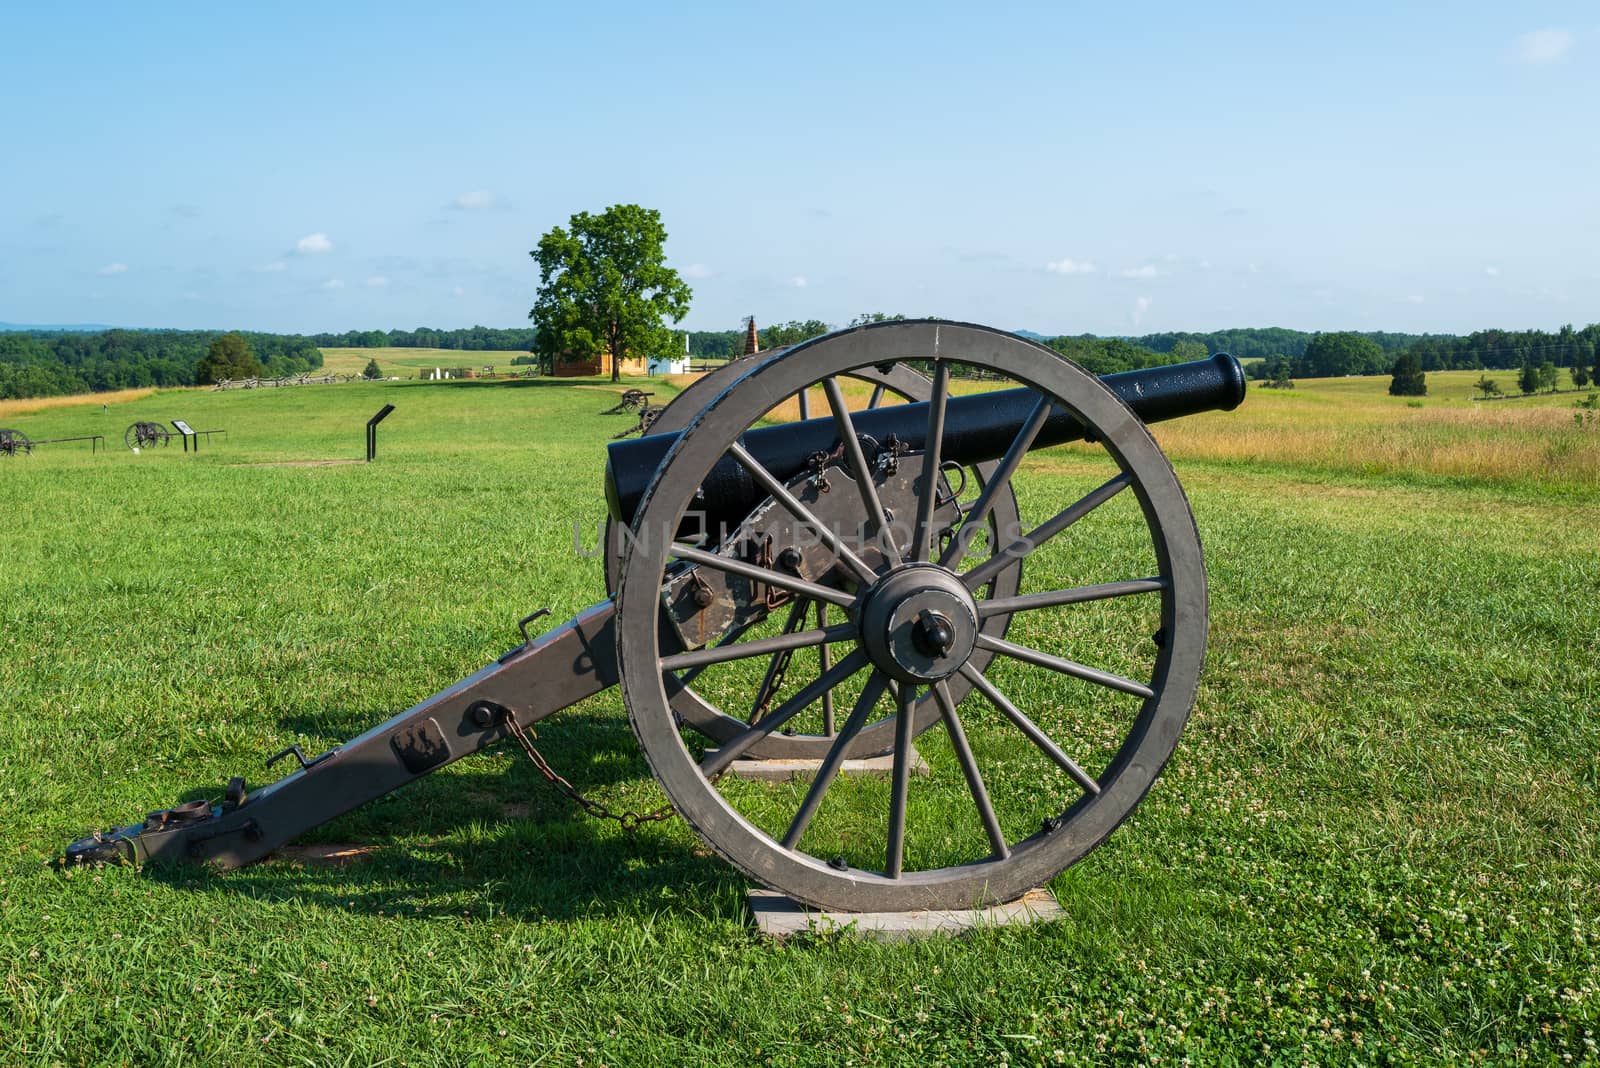 Cannon from the Civil War by jfbenning